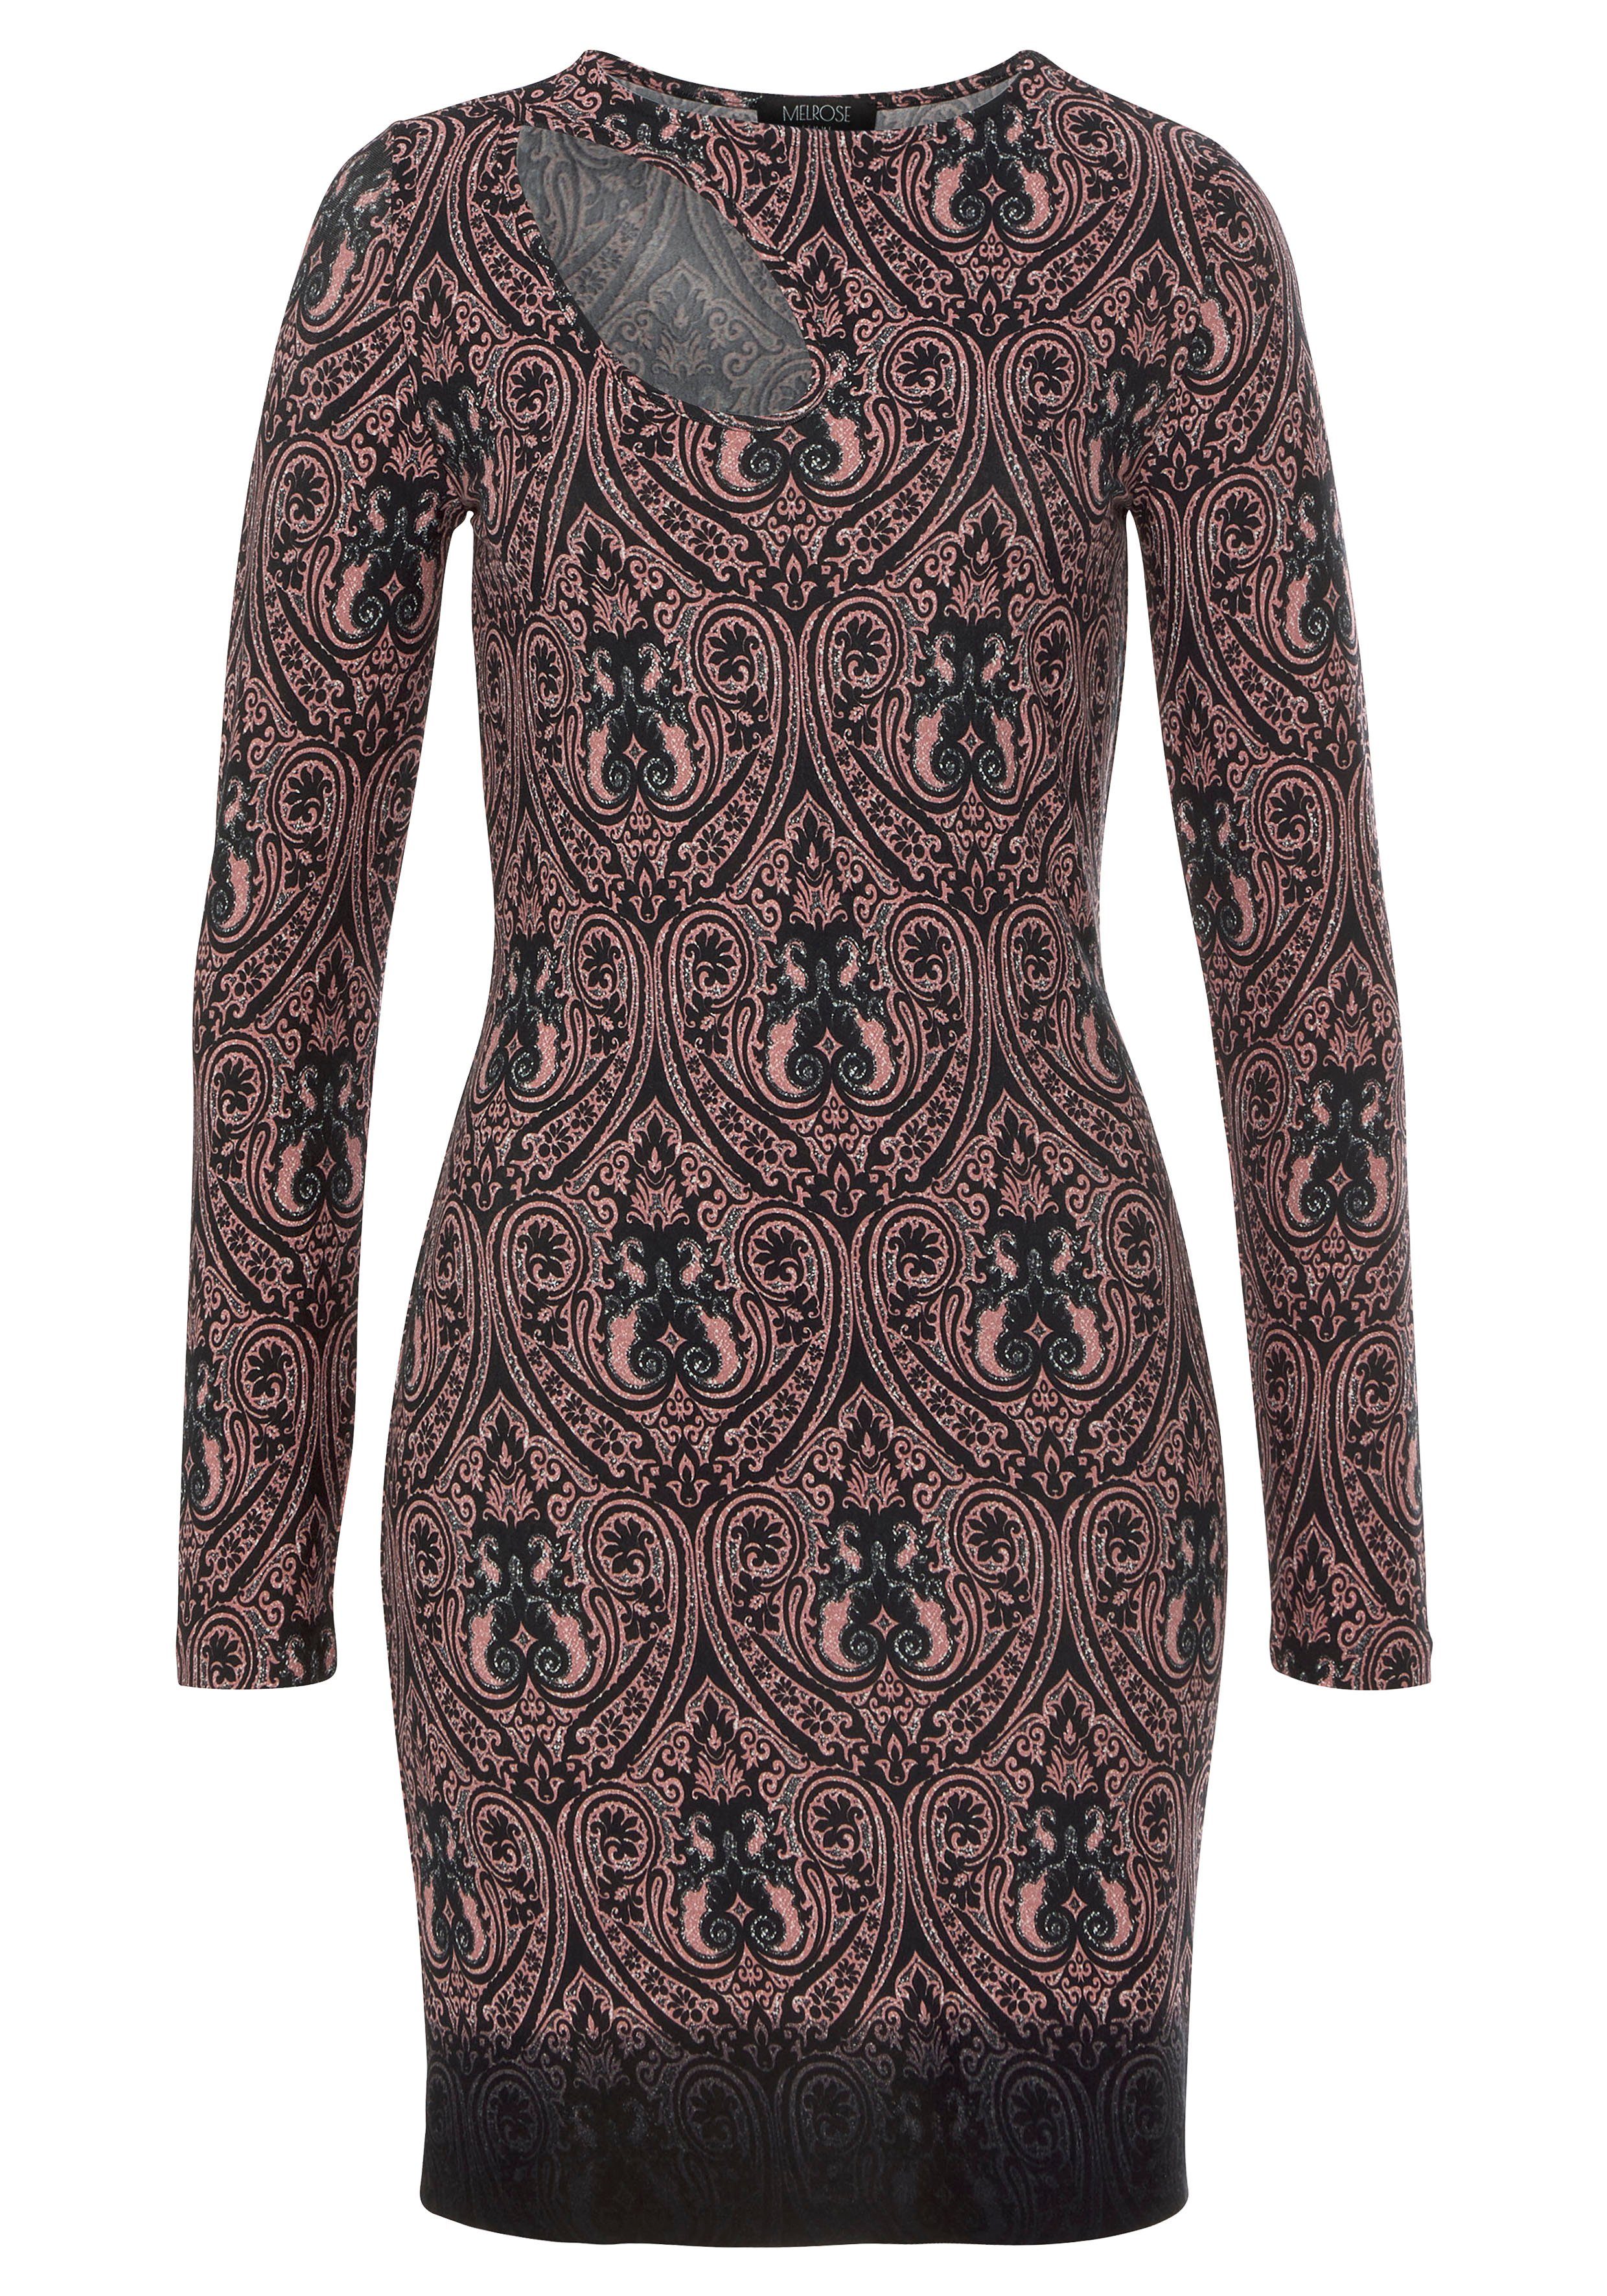 Melrose Jerseykleid mit Cut-Out Paisley-Muster und